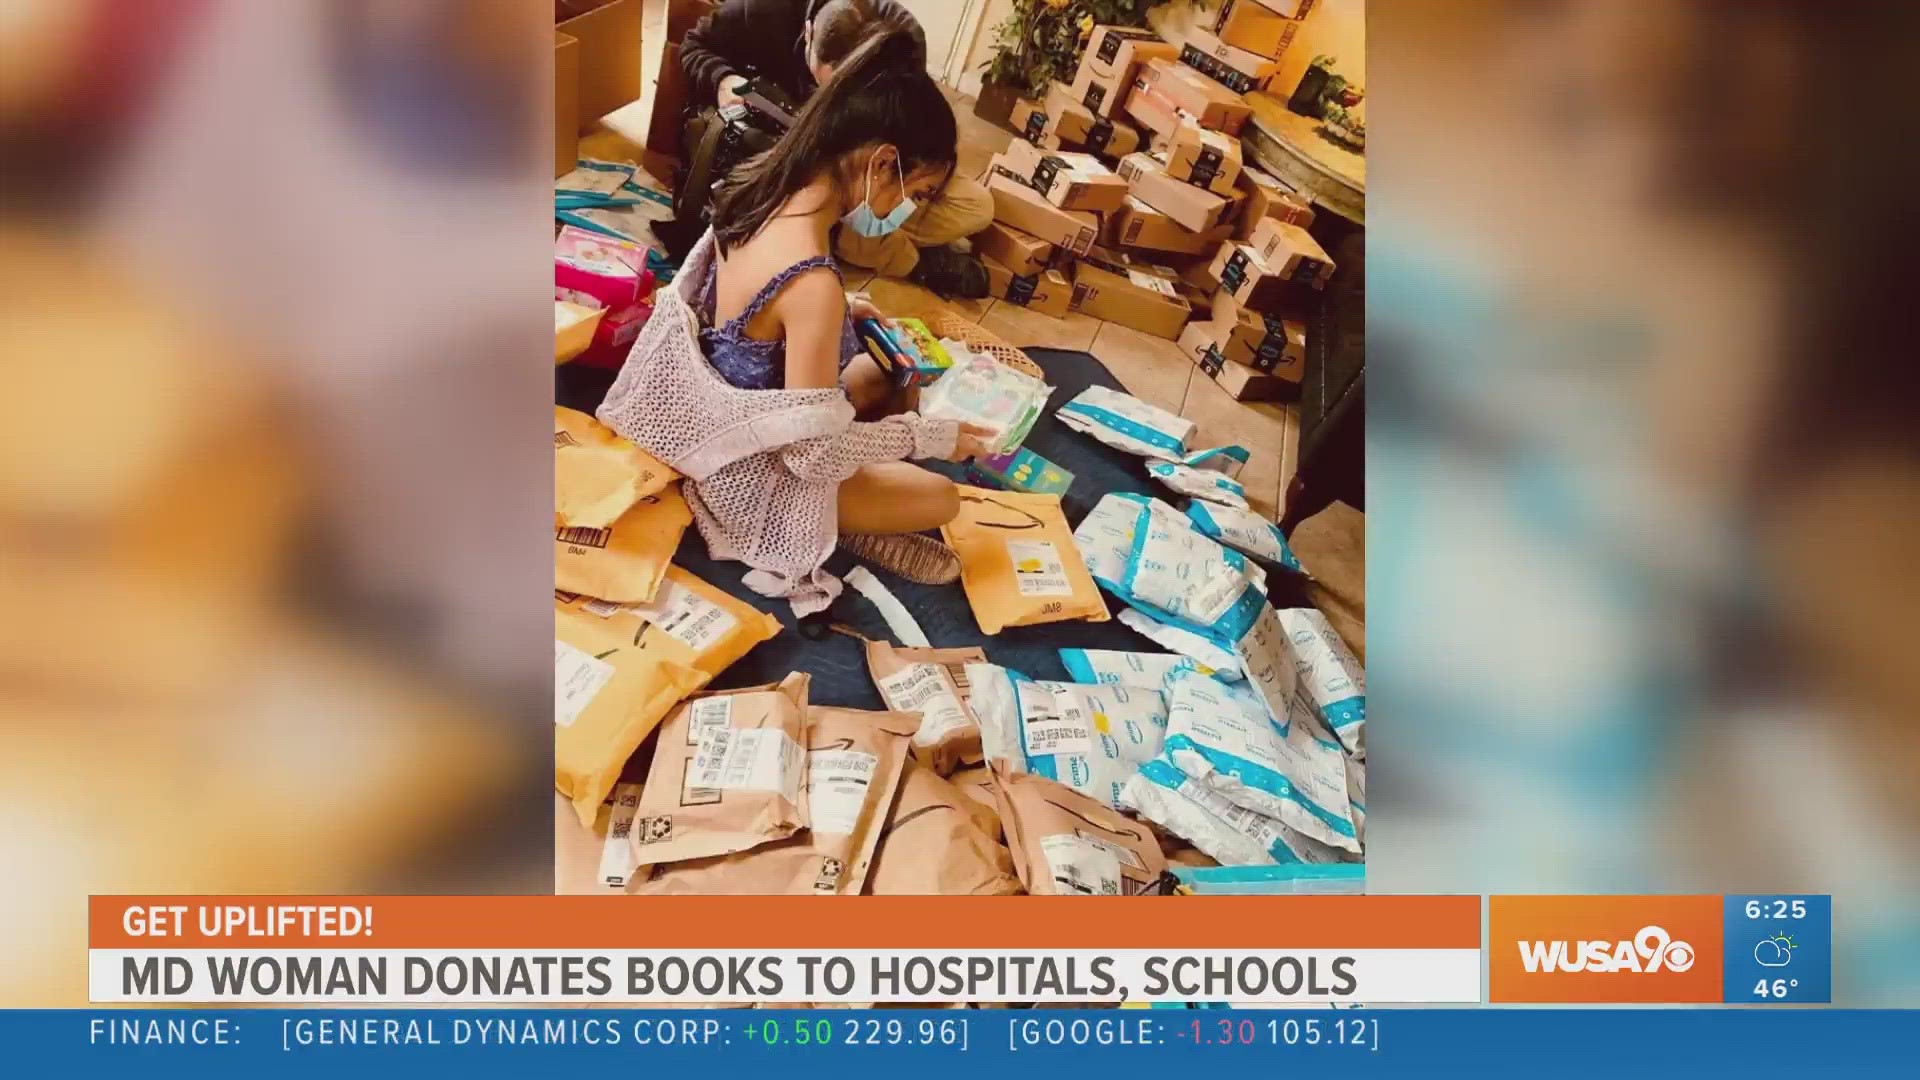 She's donated thousands of books to kids in hospitals and schools.